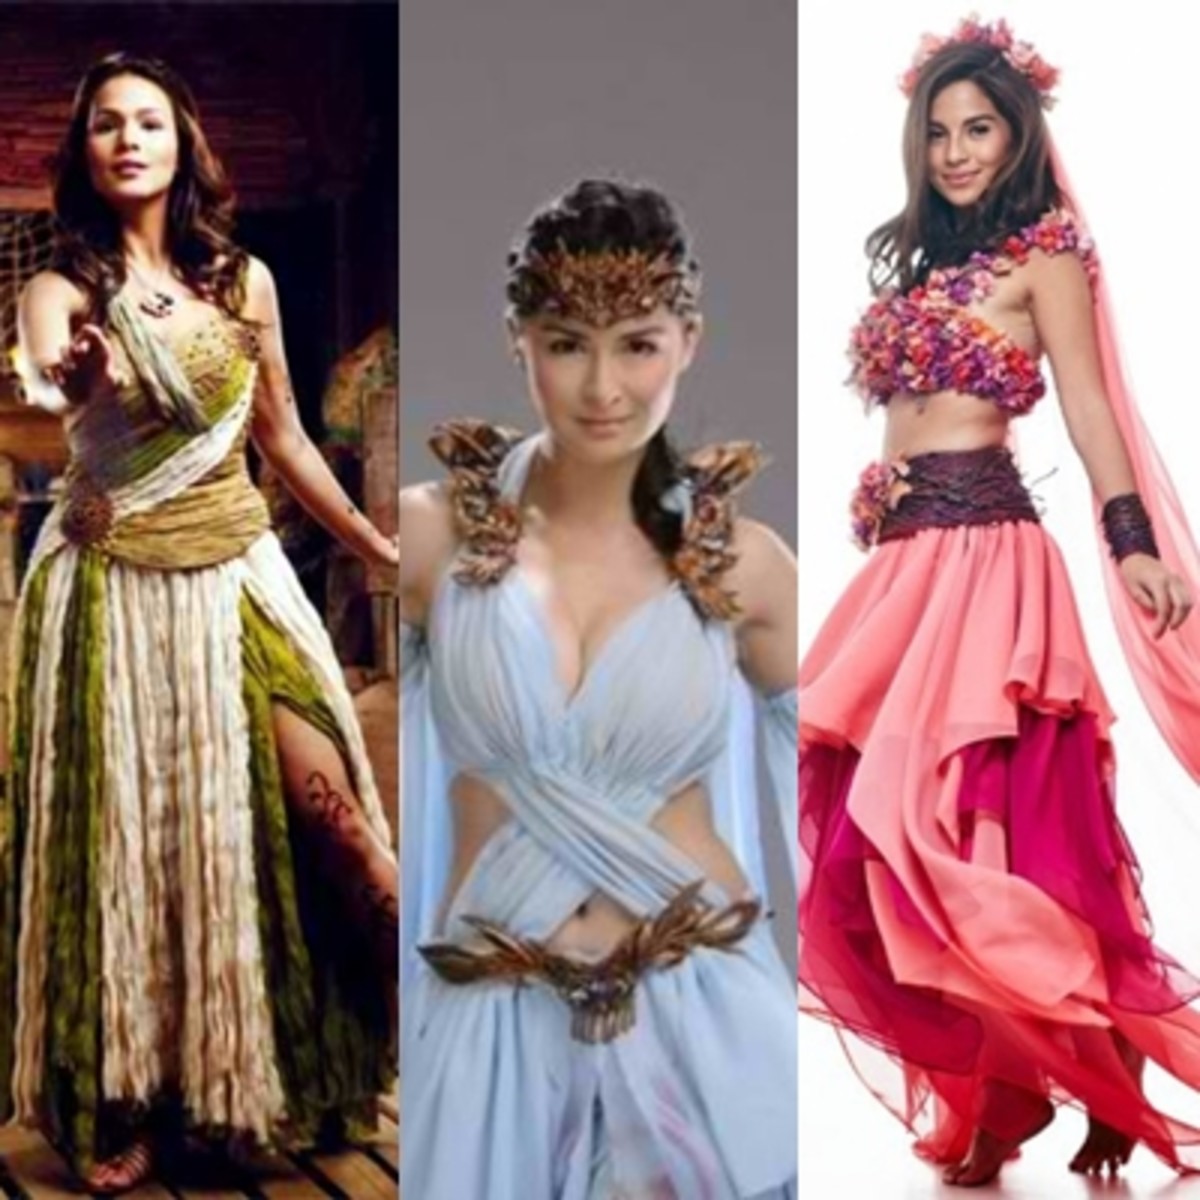 She was portrayed by various actresses in the local media, such as Iza Calzado in the movie Panday Kids; the superhero version played by Marian Rivera; and by Jasmine Curtis on TV. 